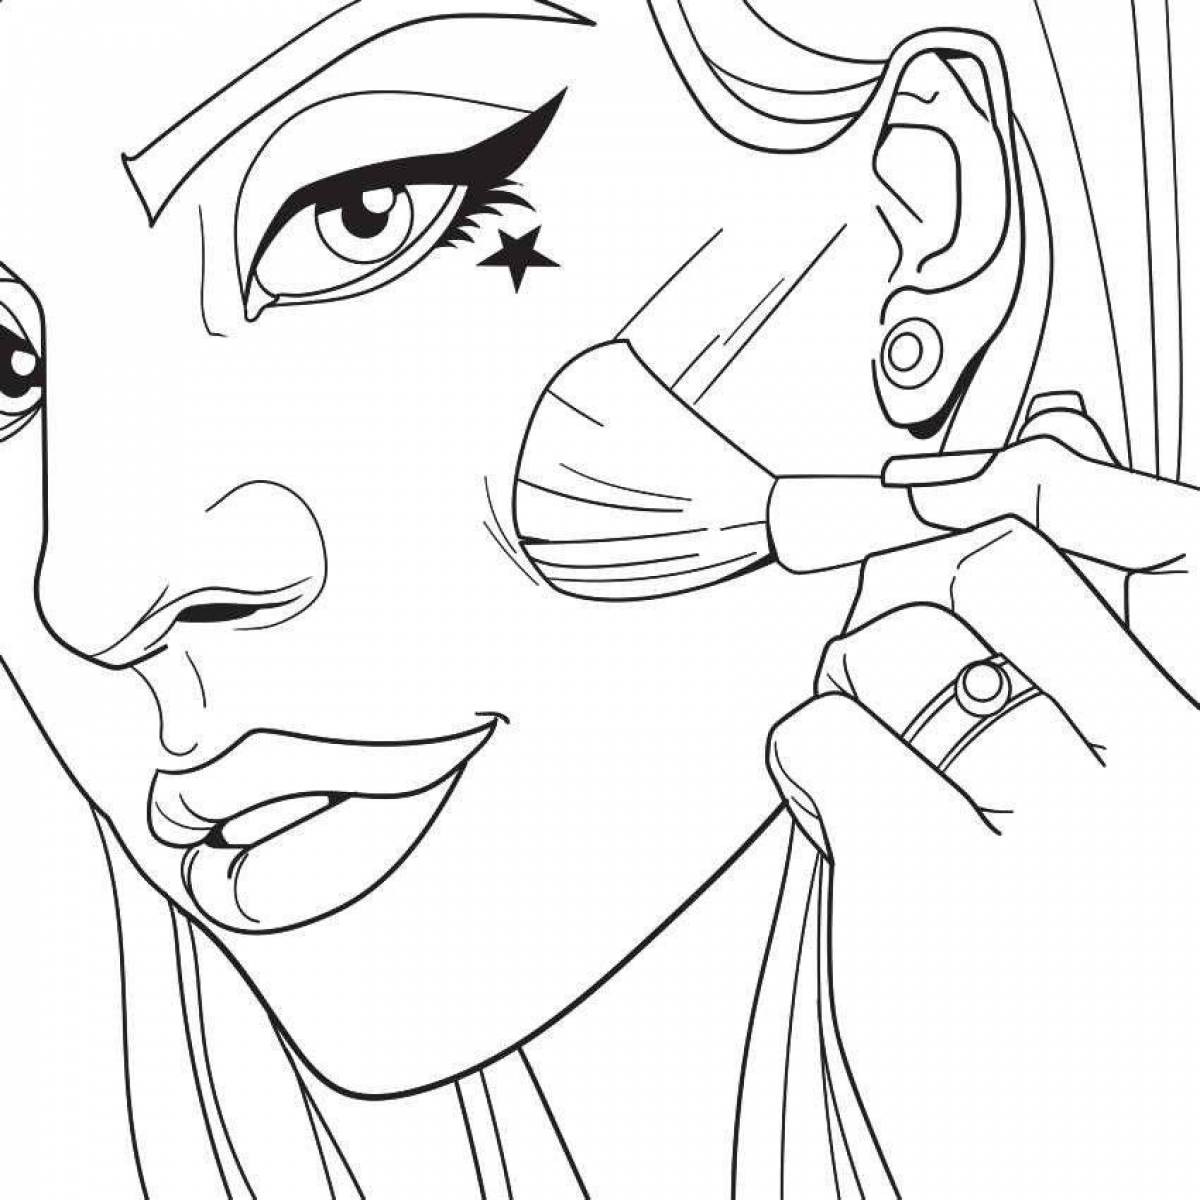 Coloring book shining makeup for girls